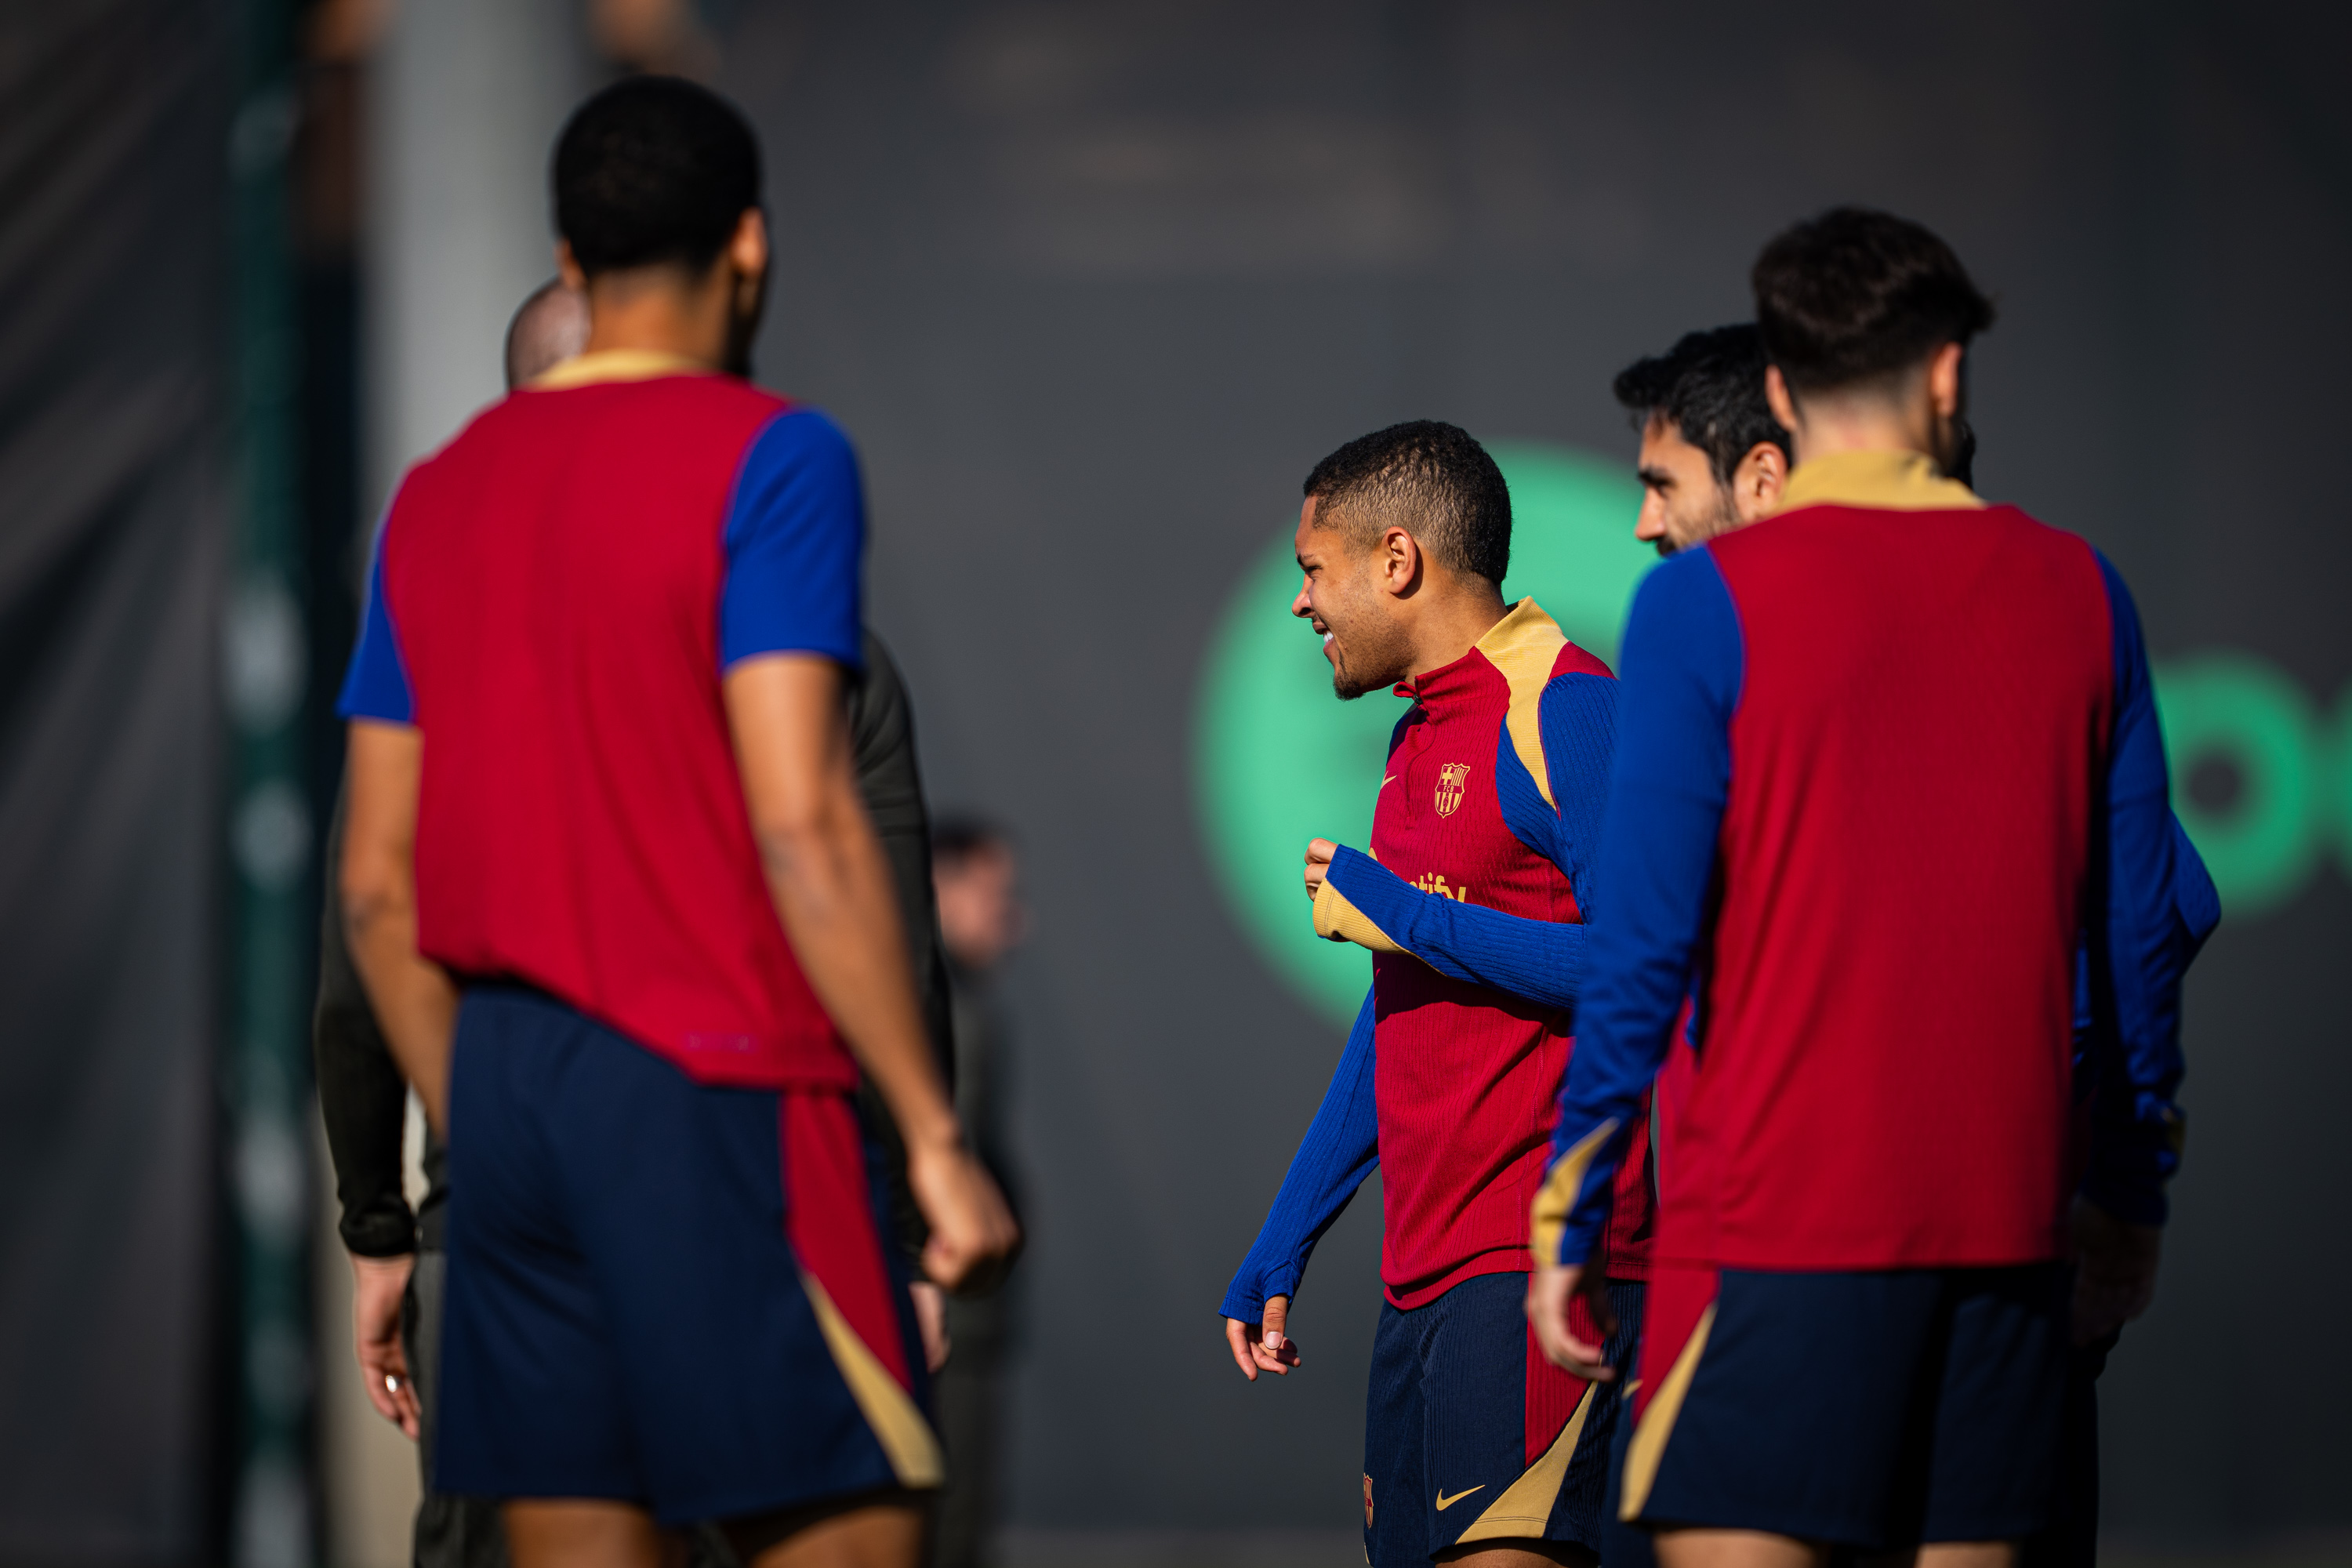 Back to training after beating Osasuna